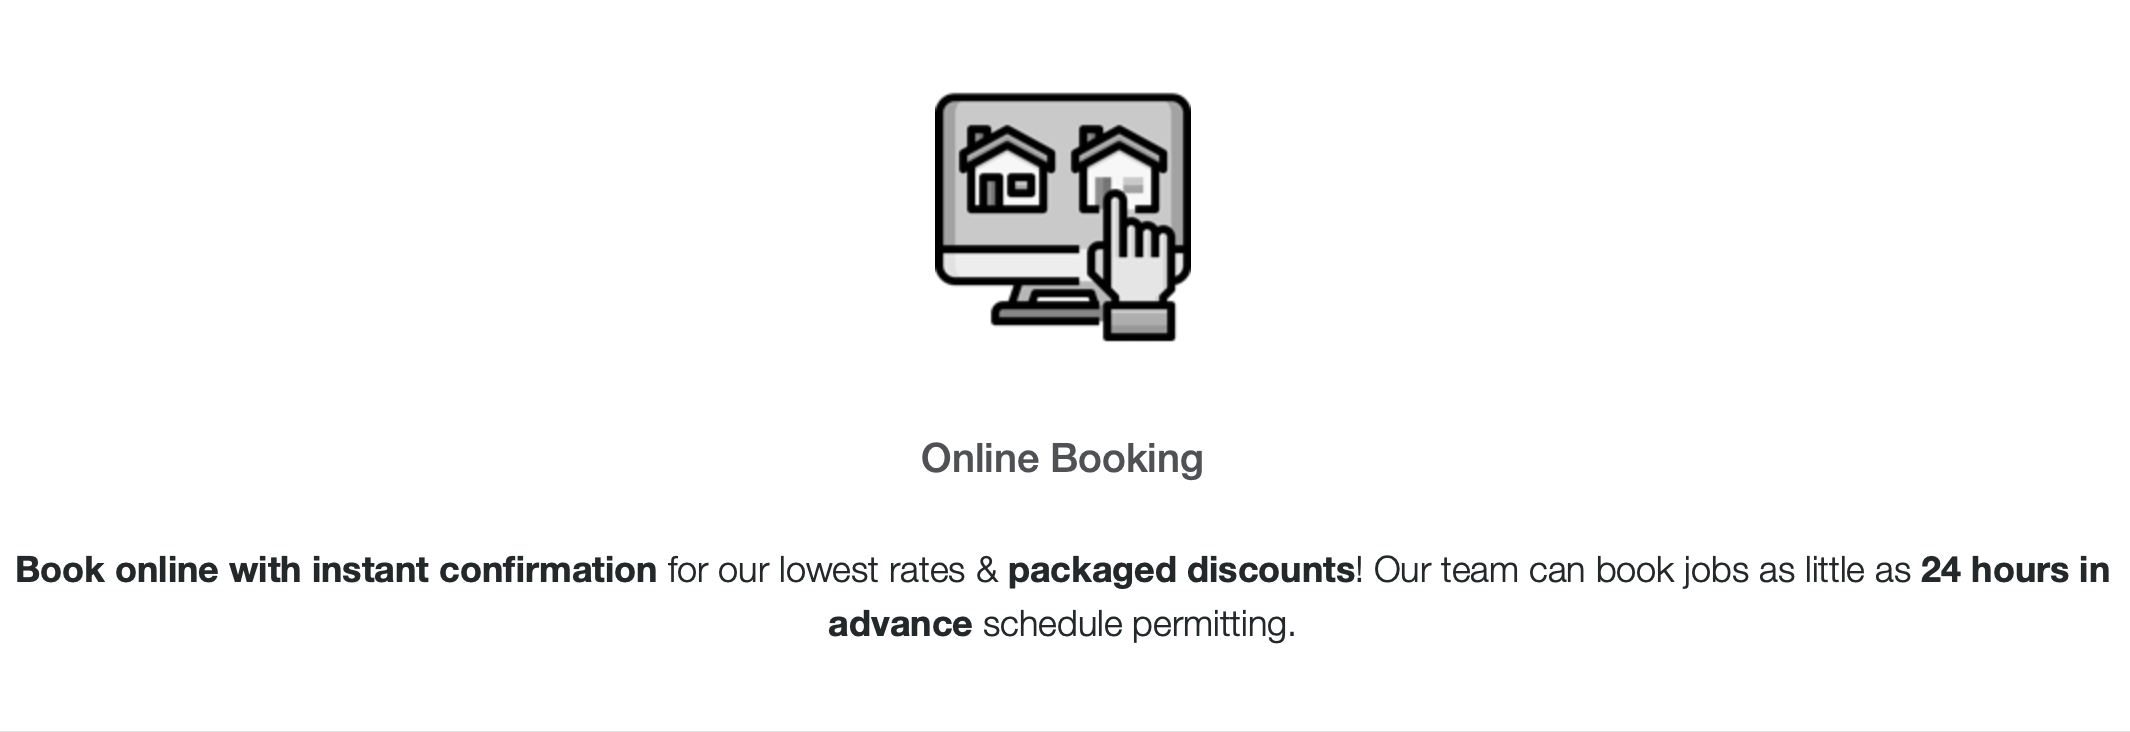 Book online with instant confirmation for our lowest rates & packaged discounts! Our team can book jobs as little as 24 hours in advance schedule permitting